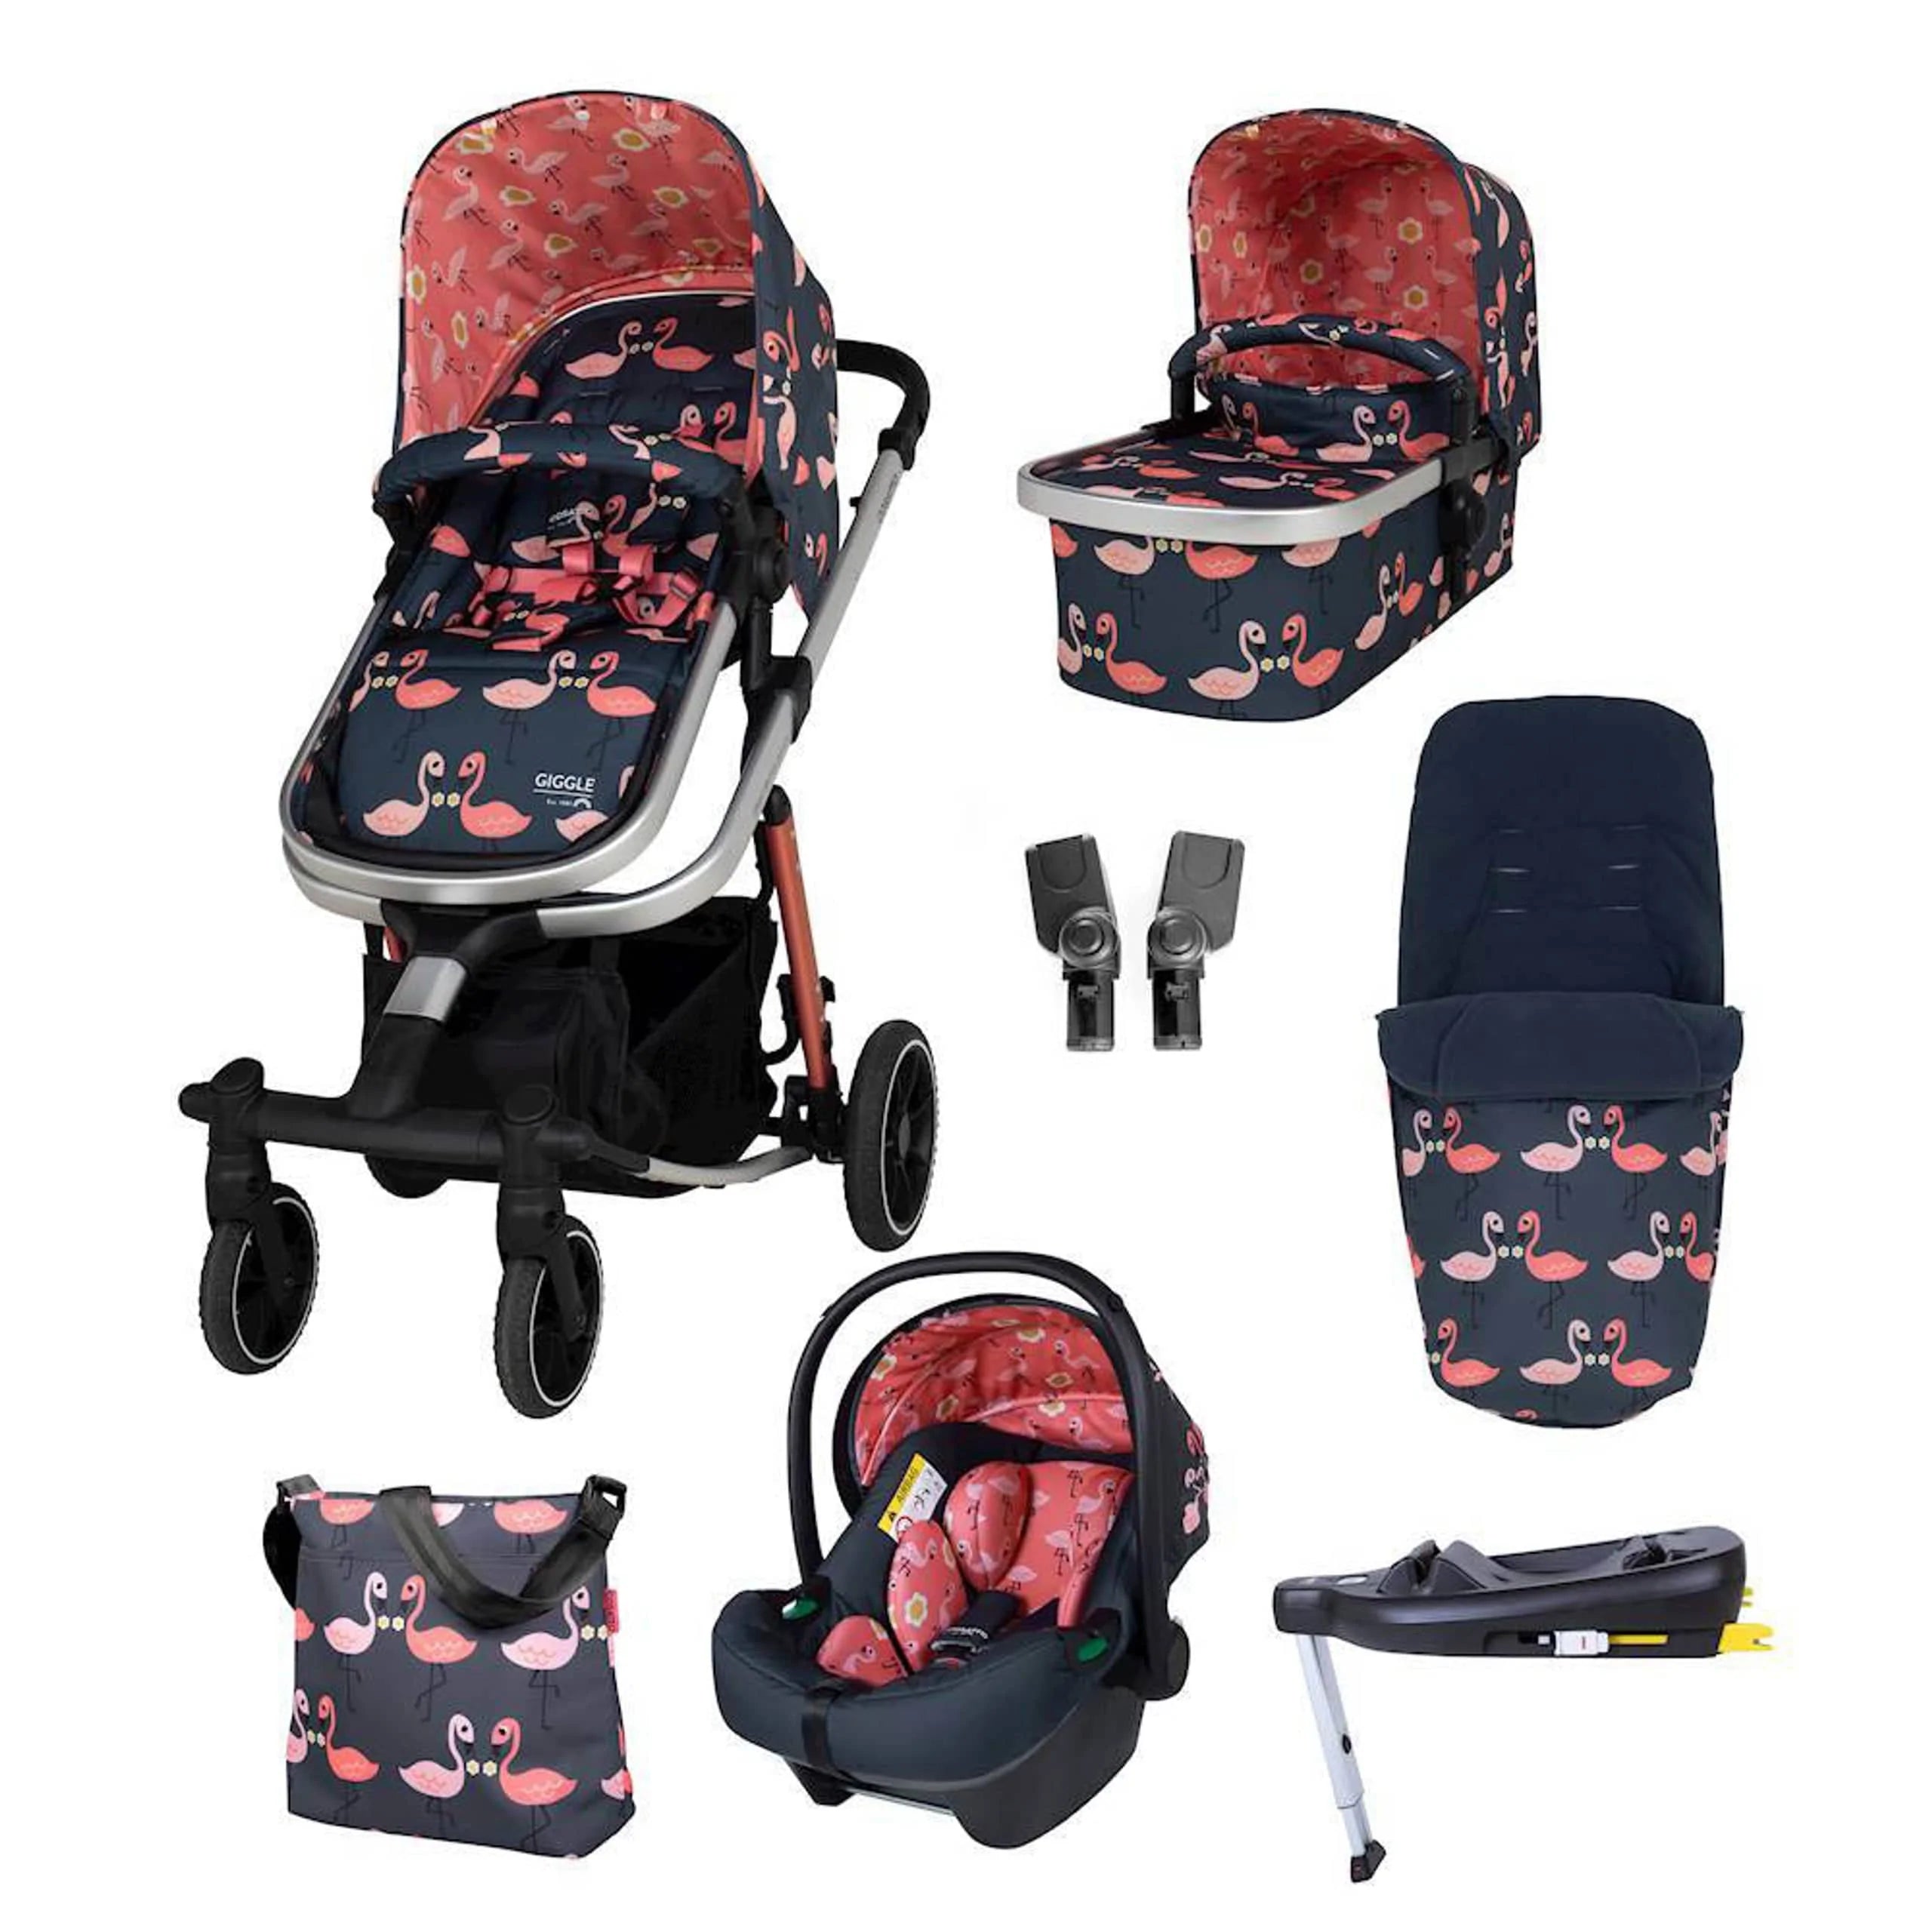 Cosatto Prams & Car Seat Bundles Pretty Flamingo Cosatto Giggle Trail i-Size Everything Bundle - Direct Delivery